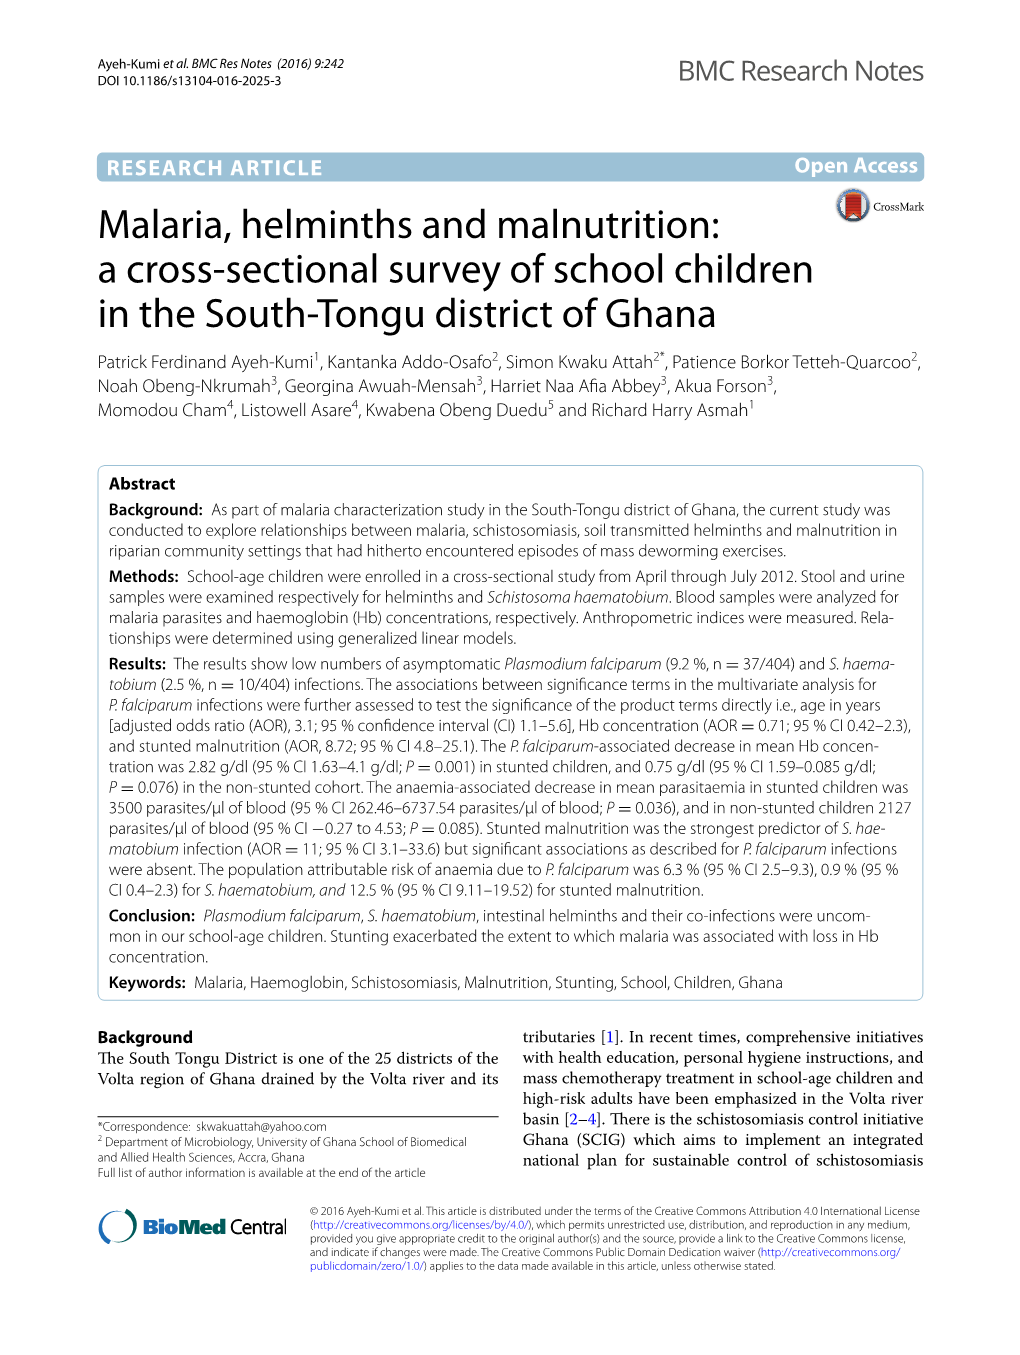 Malaria, Helminths and Malnutrition: a Cross-Sectional Survey of School